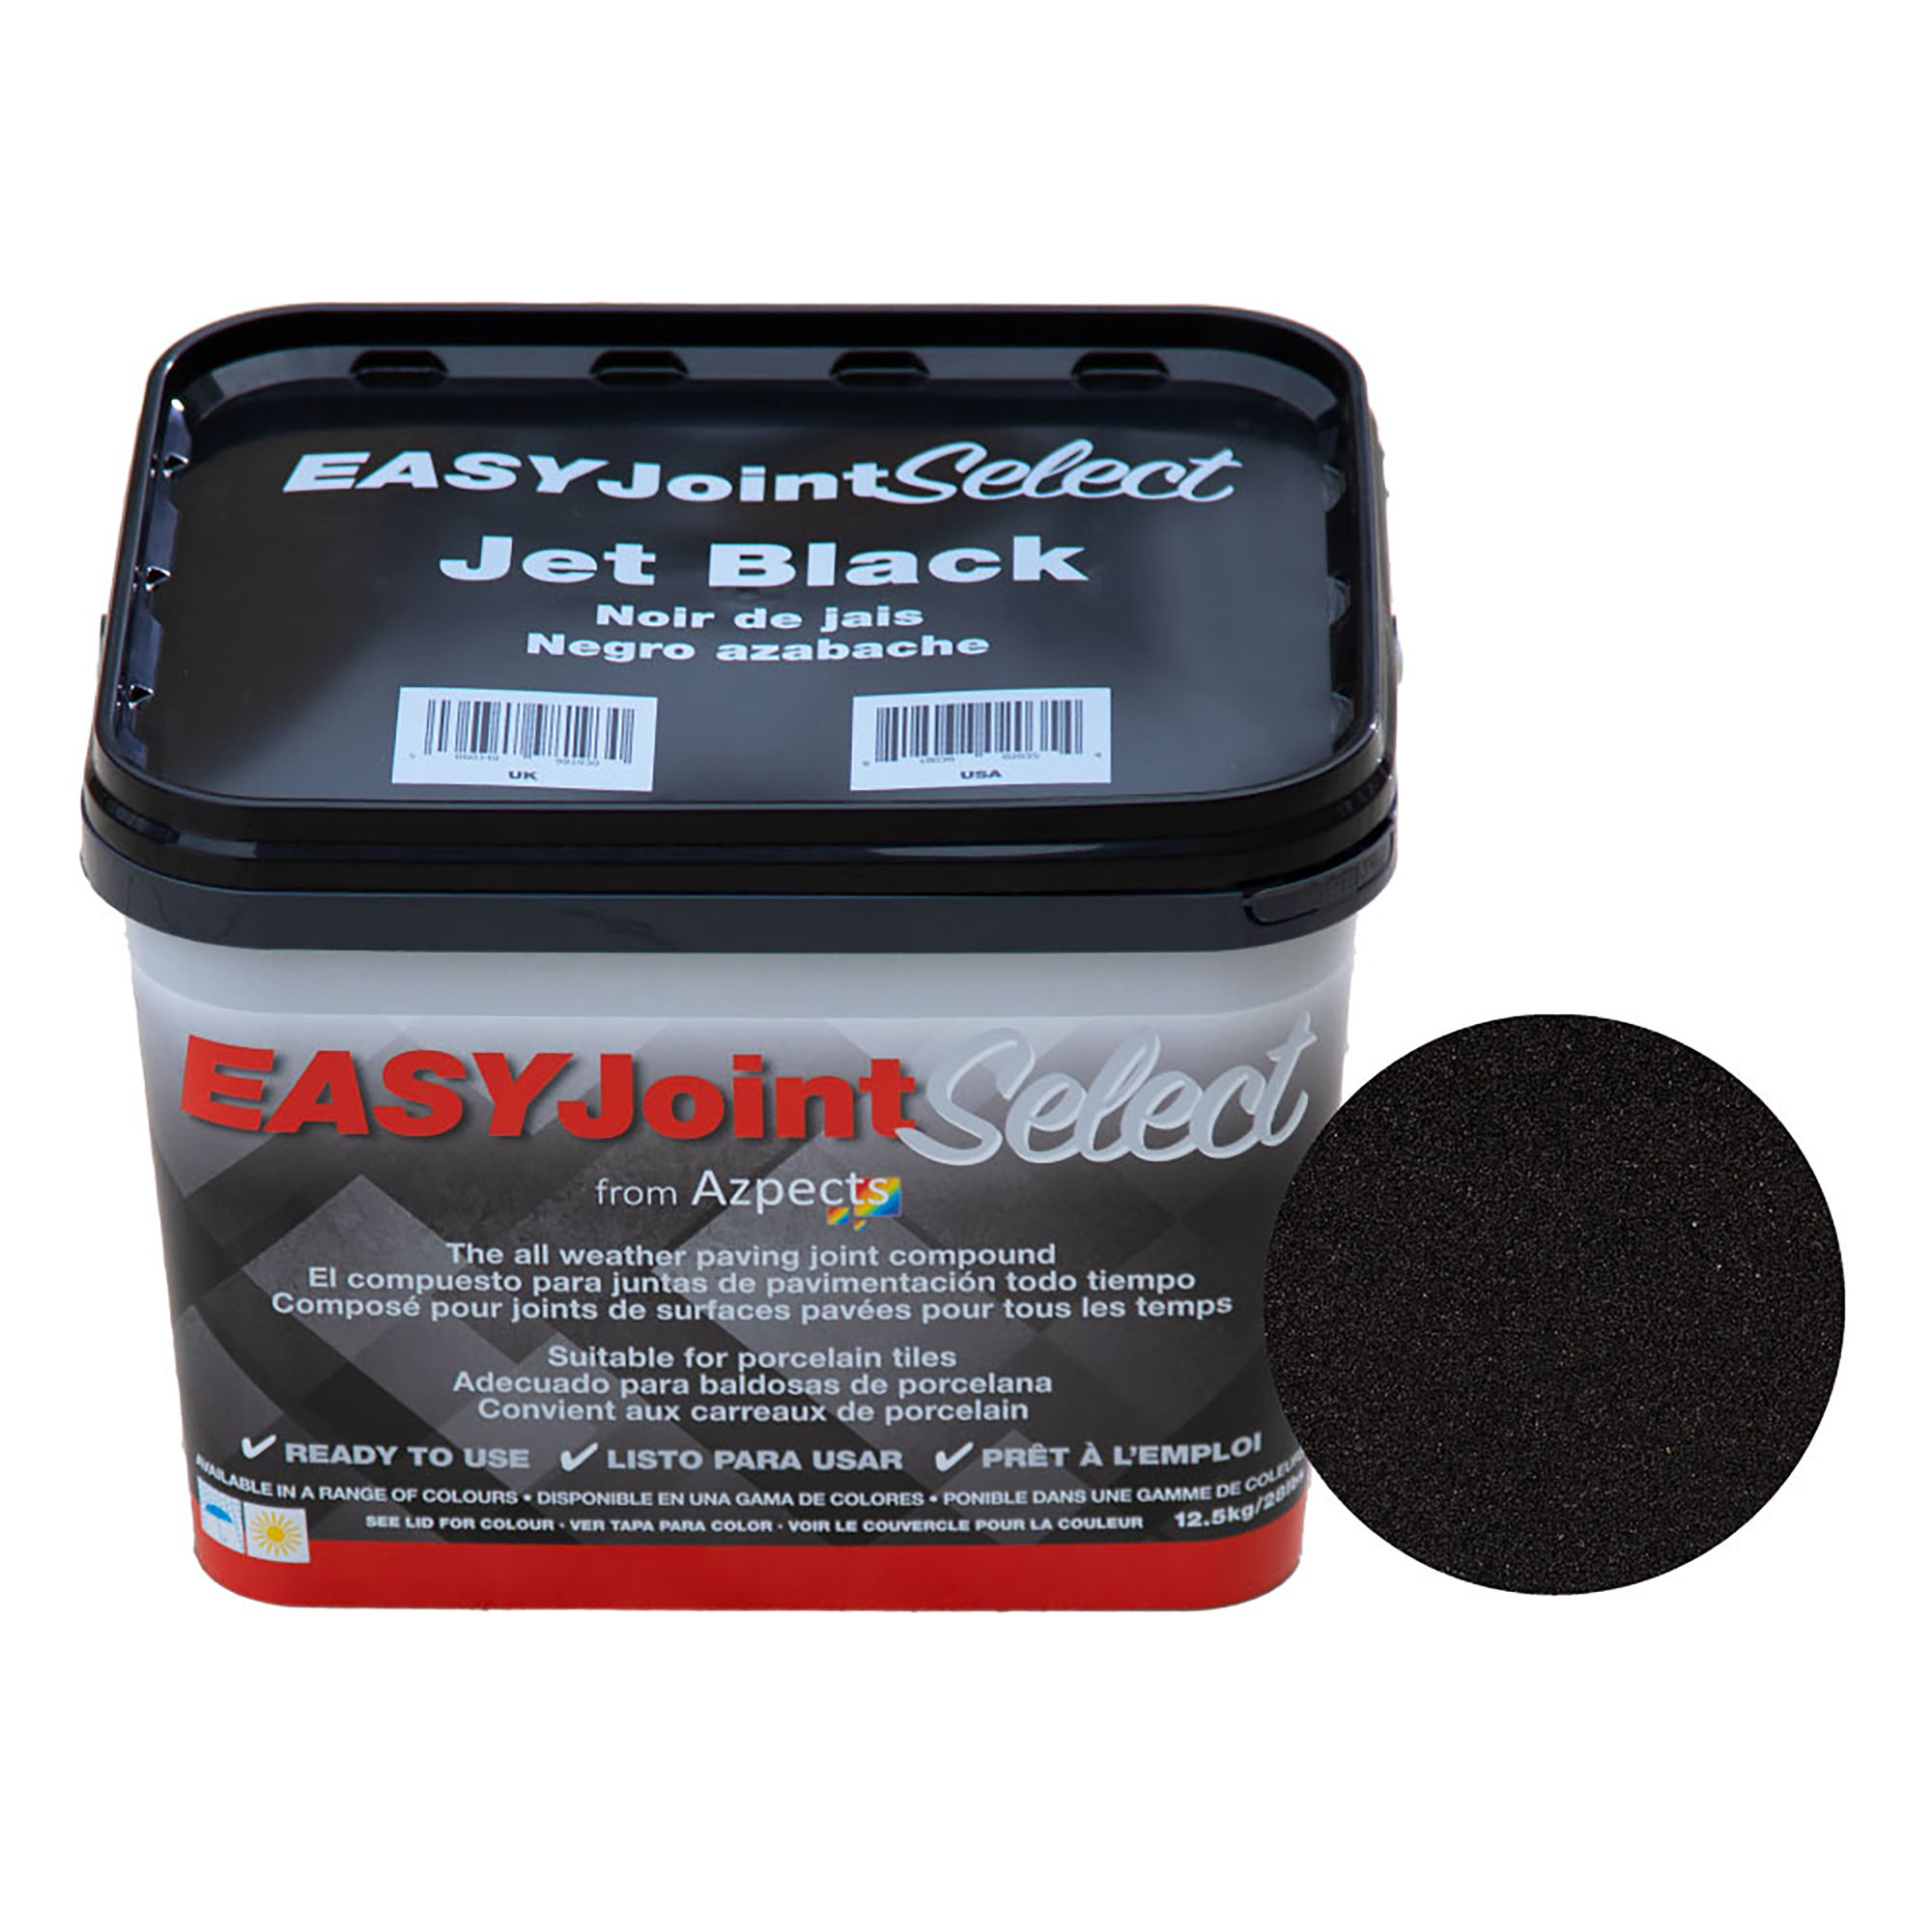 Azpects EASYJoint Select Jointing Compound Jet Black 12.5kg